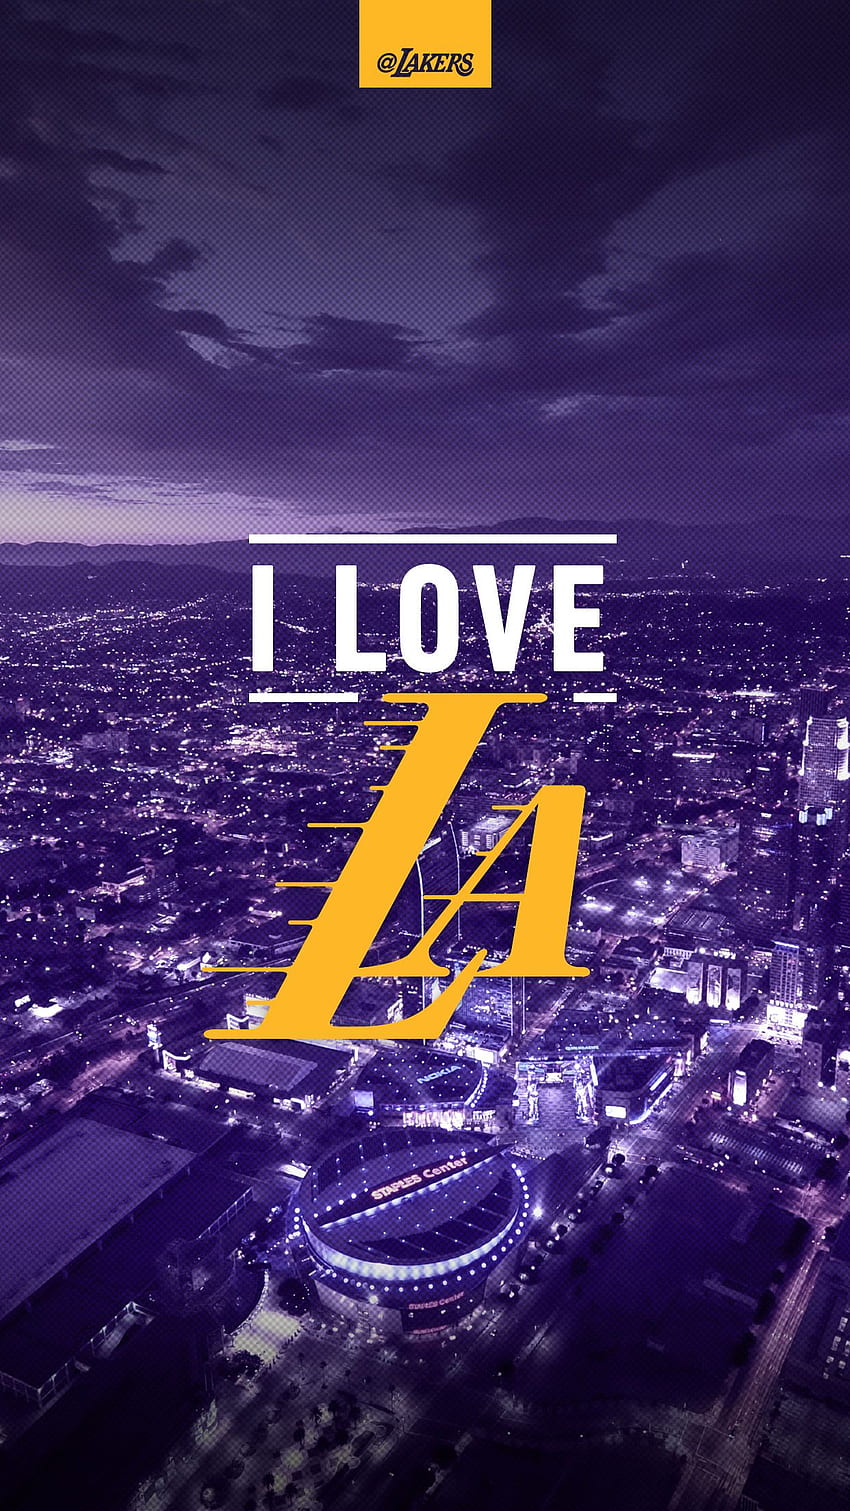 Here's another mobile wallpaper I made for everyone! Let's keep  representing the Lakers Nation!! 💜💛💜💛💜💛 : r/lakers